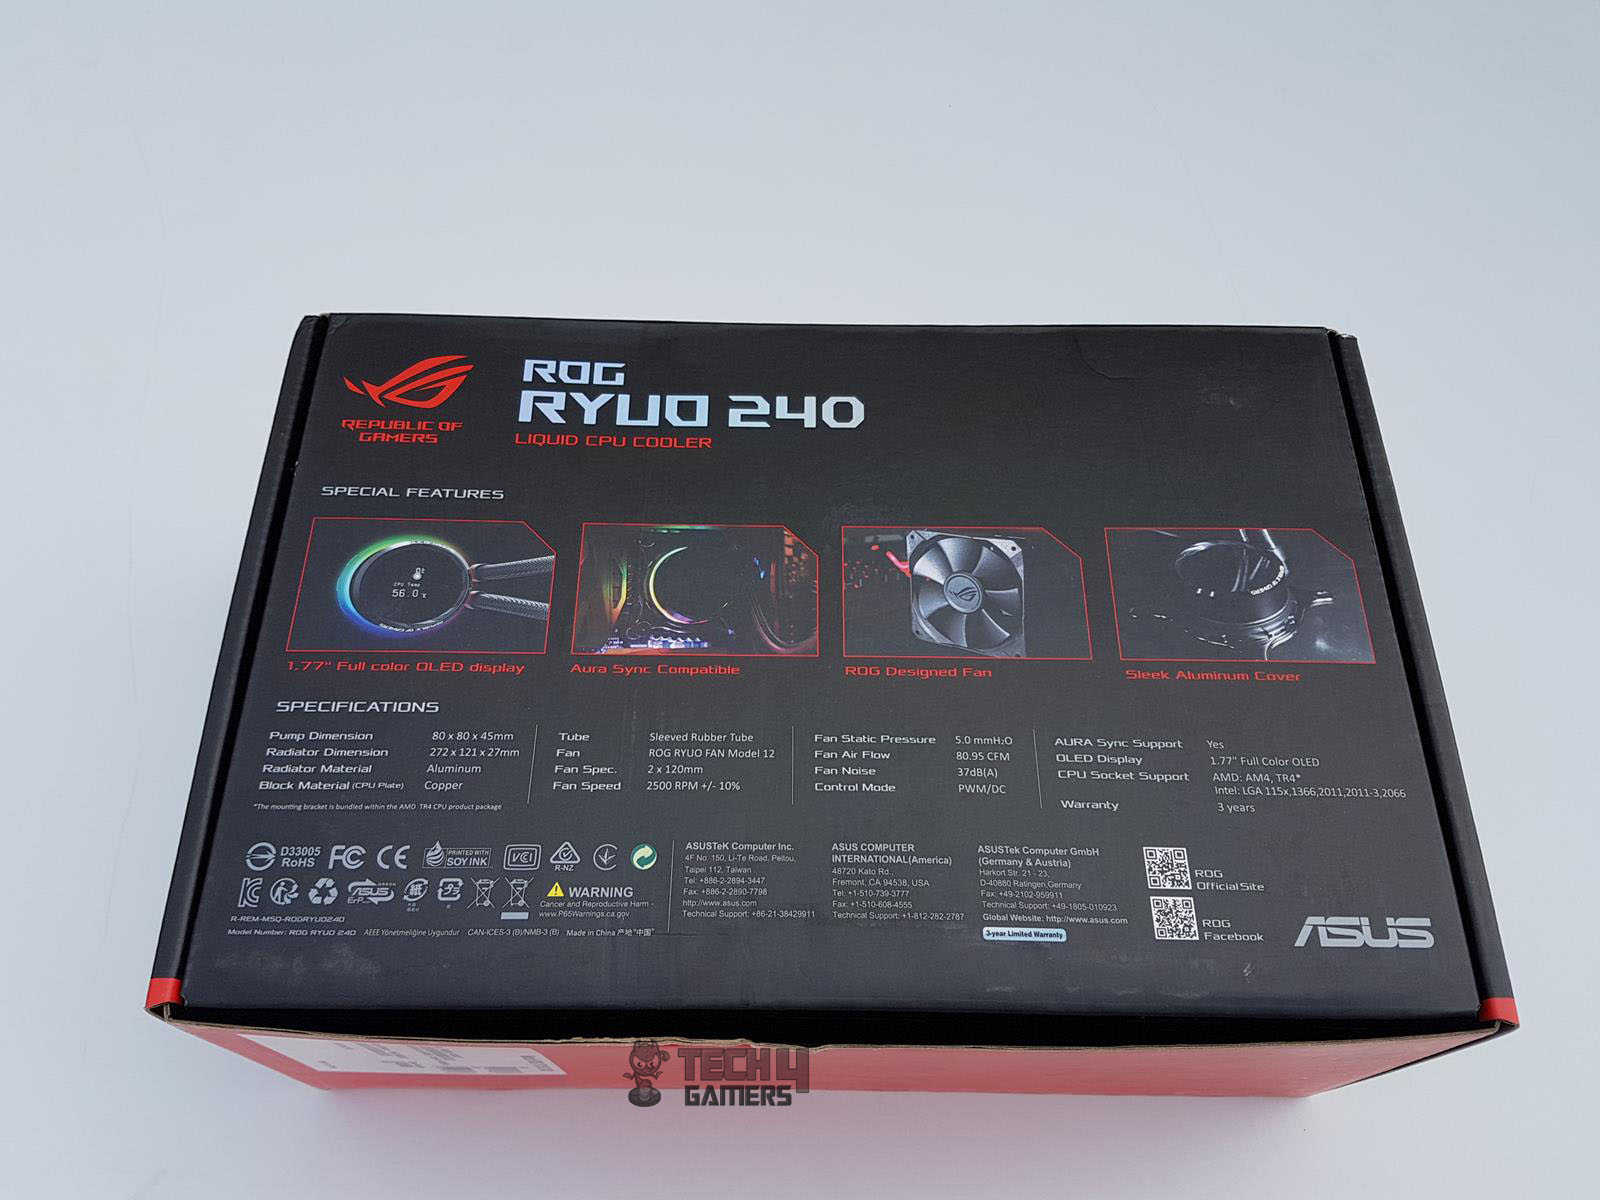 ASUS ROG Ryuo 240 CPU Liquid Cooler Review — The backside of the box